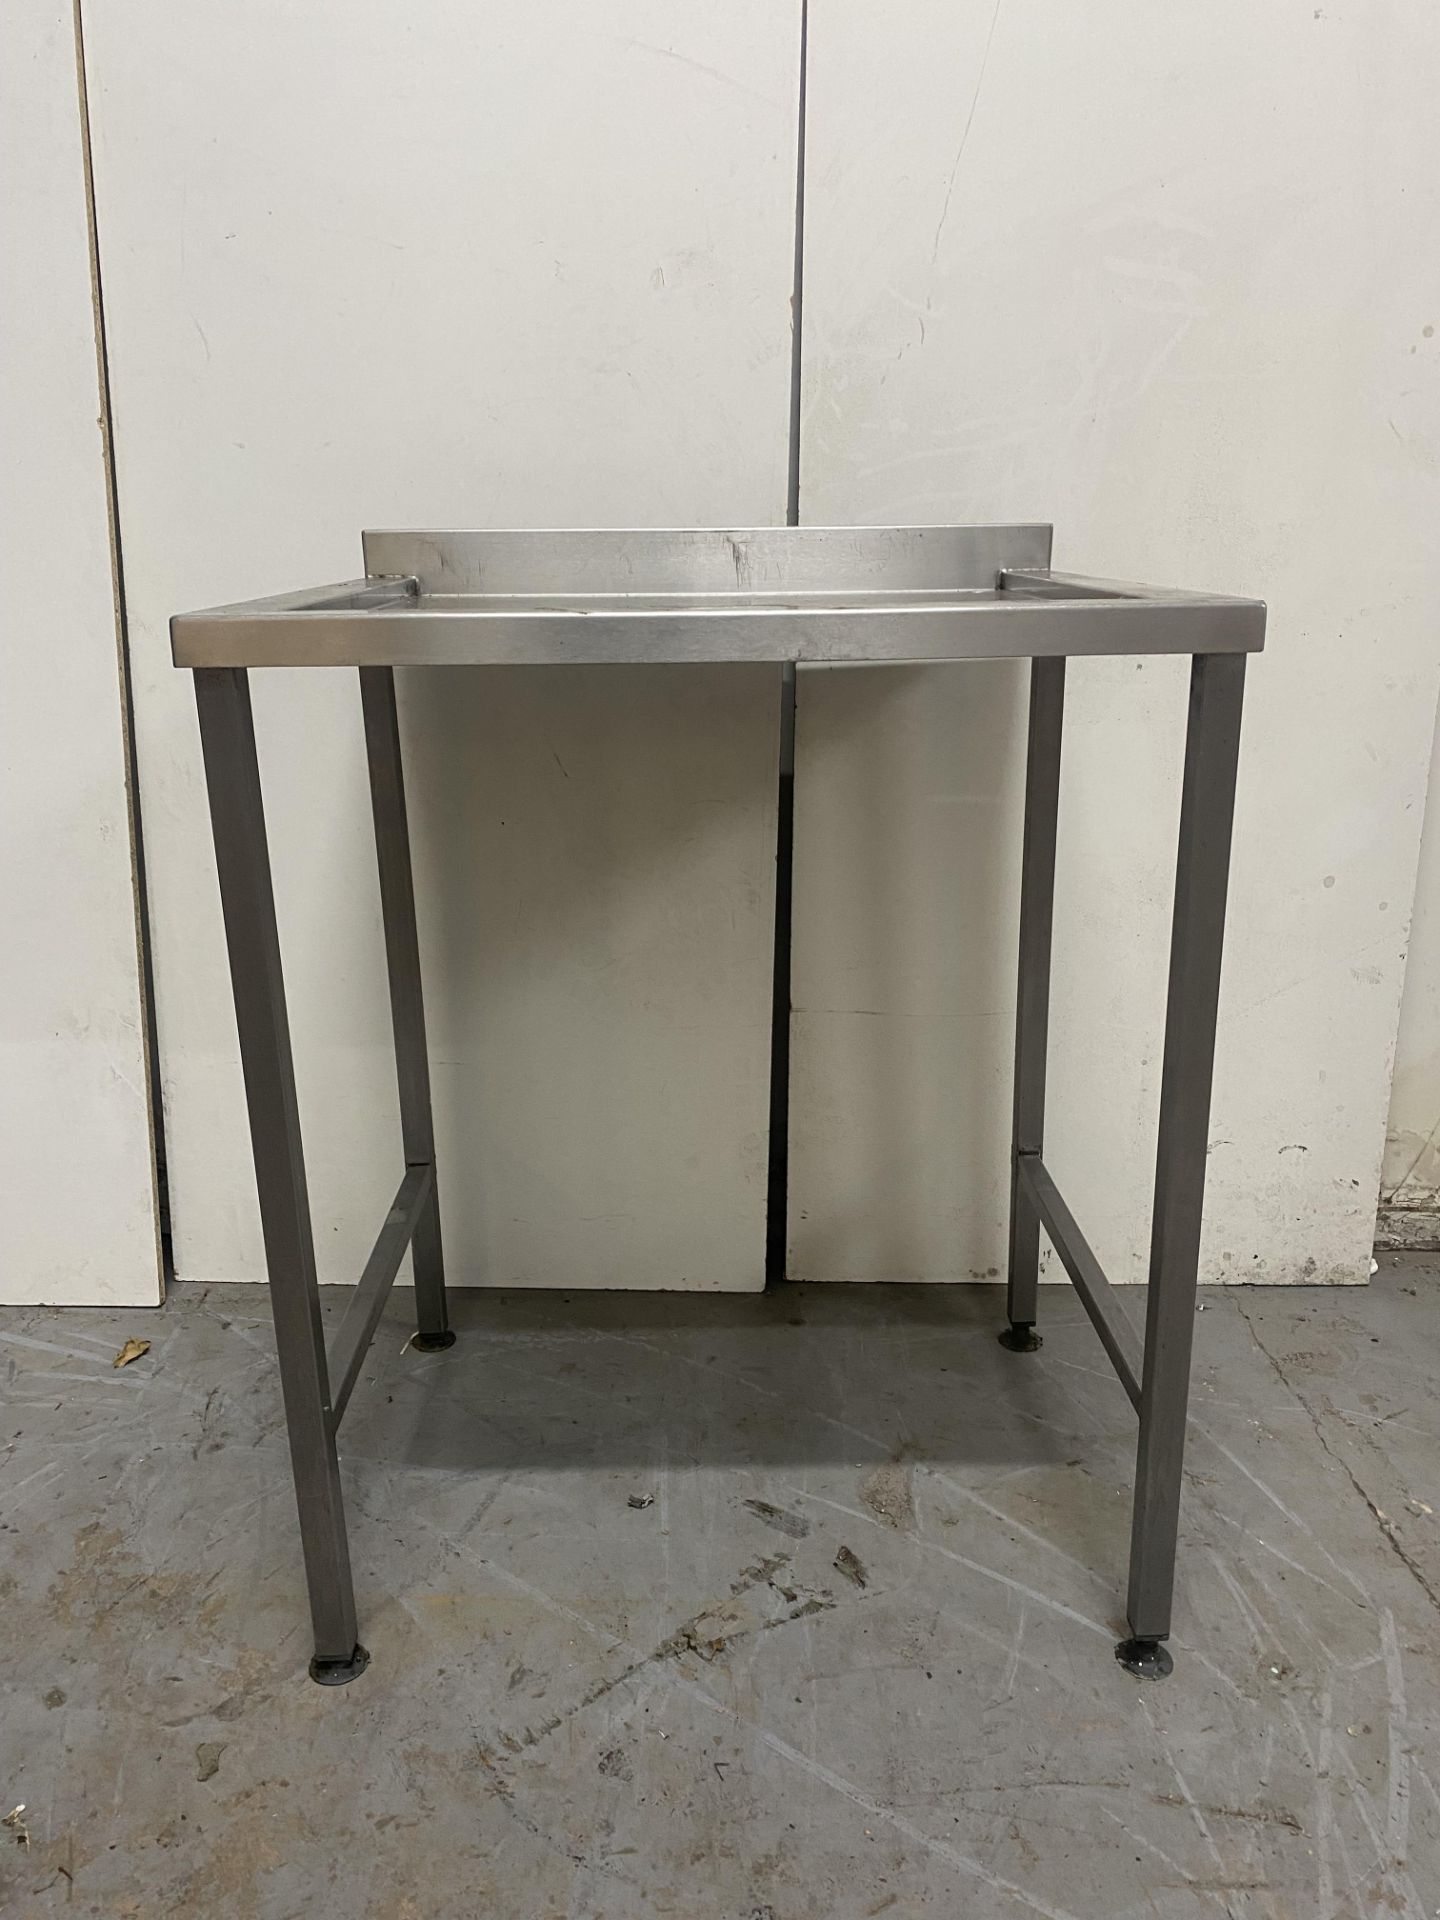 750mm Stainless Steel Catering Preperation Table - Image 4 of 5